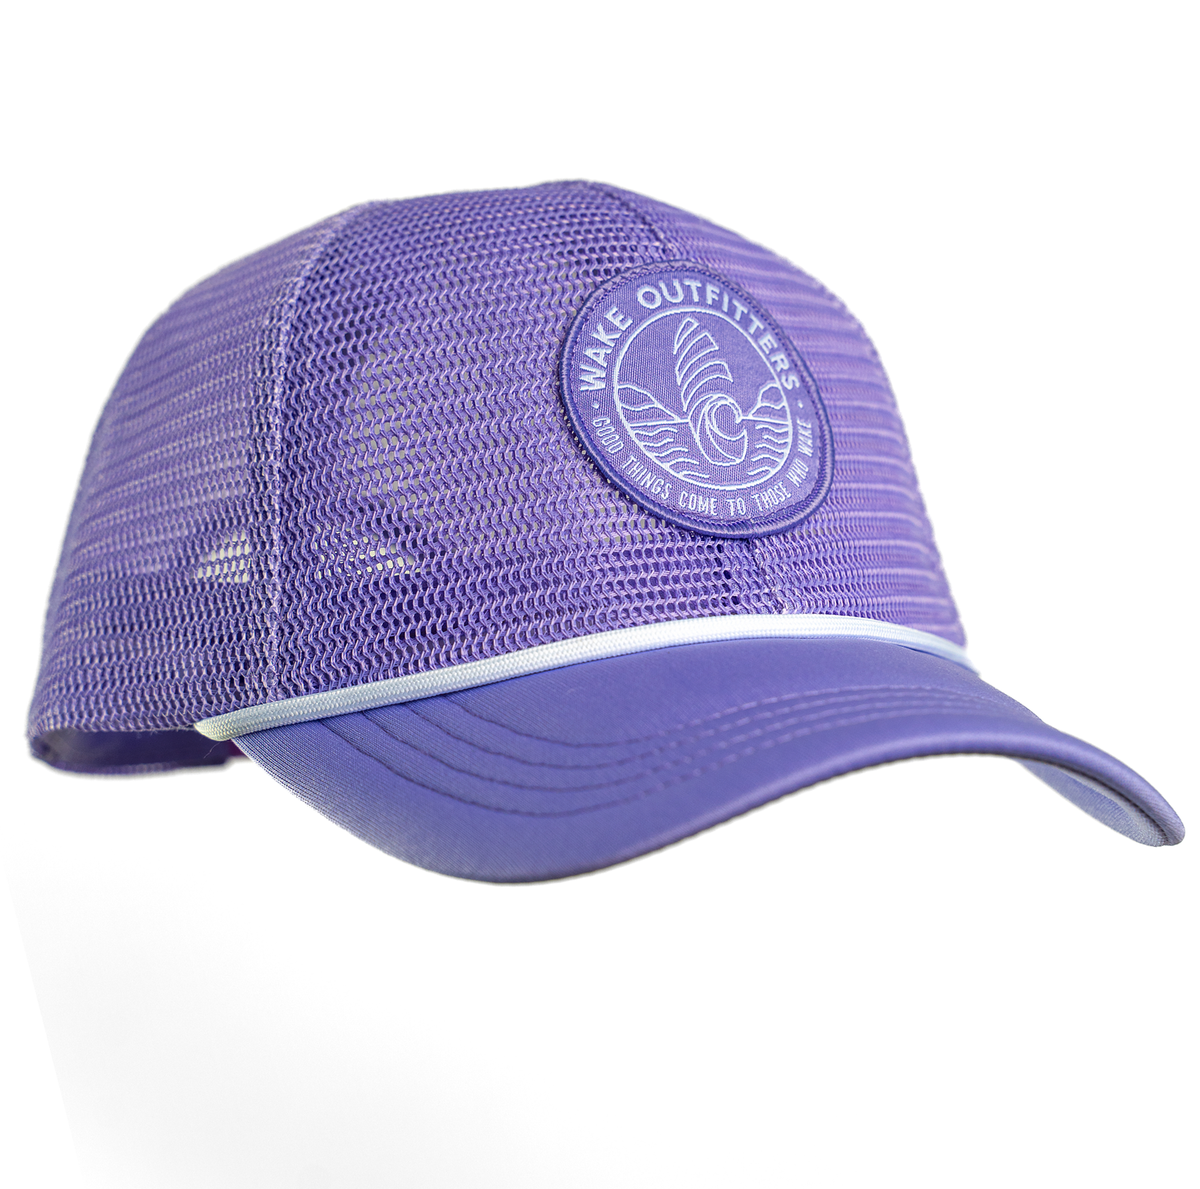 Wake Outfitters Full Mesh Hat - Wisteria